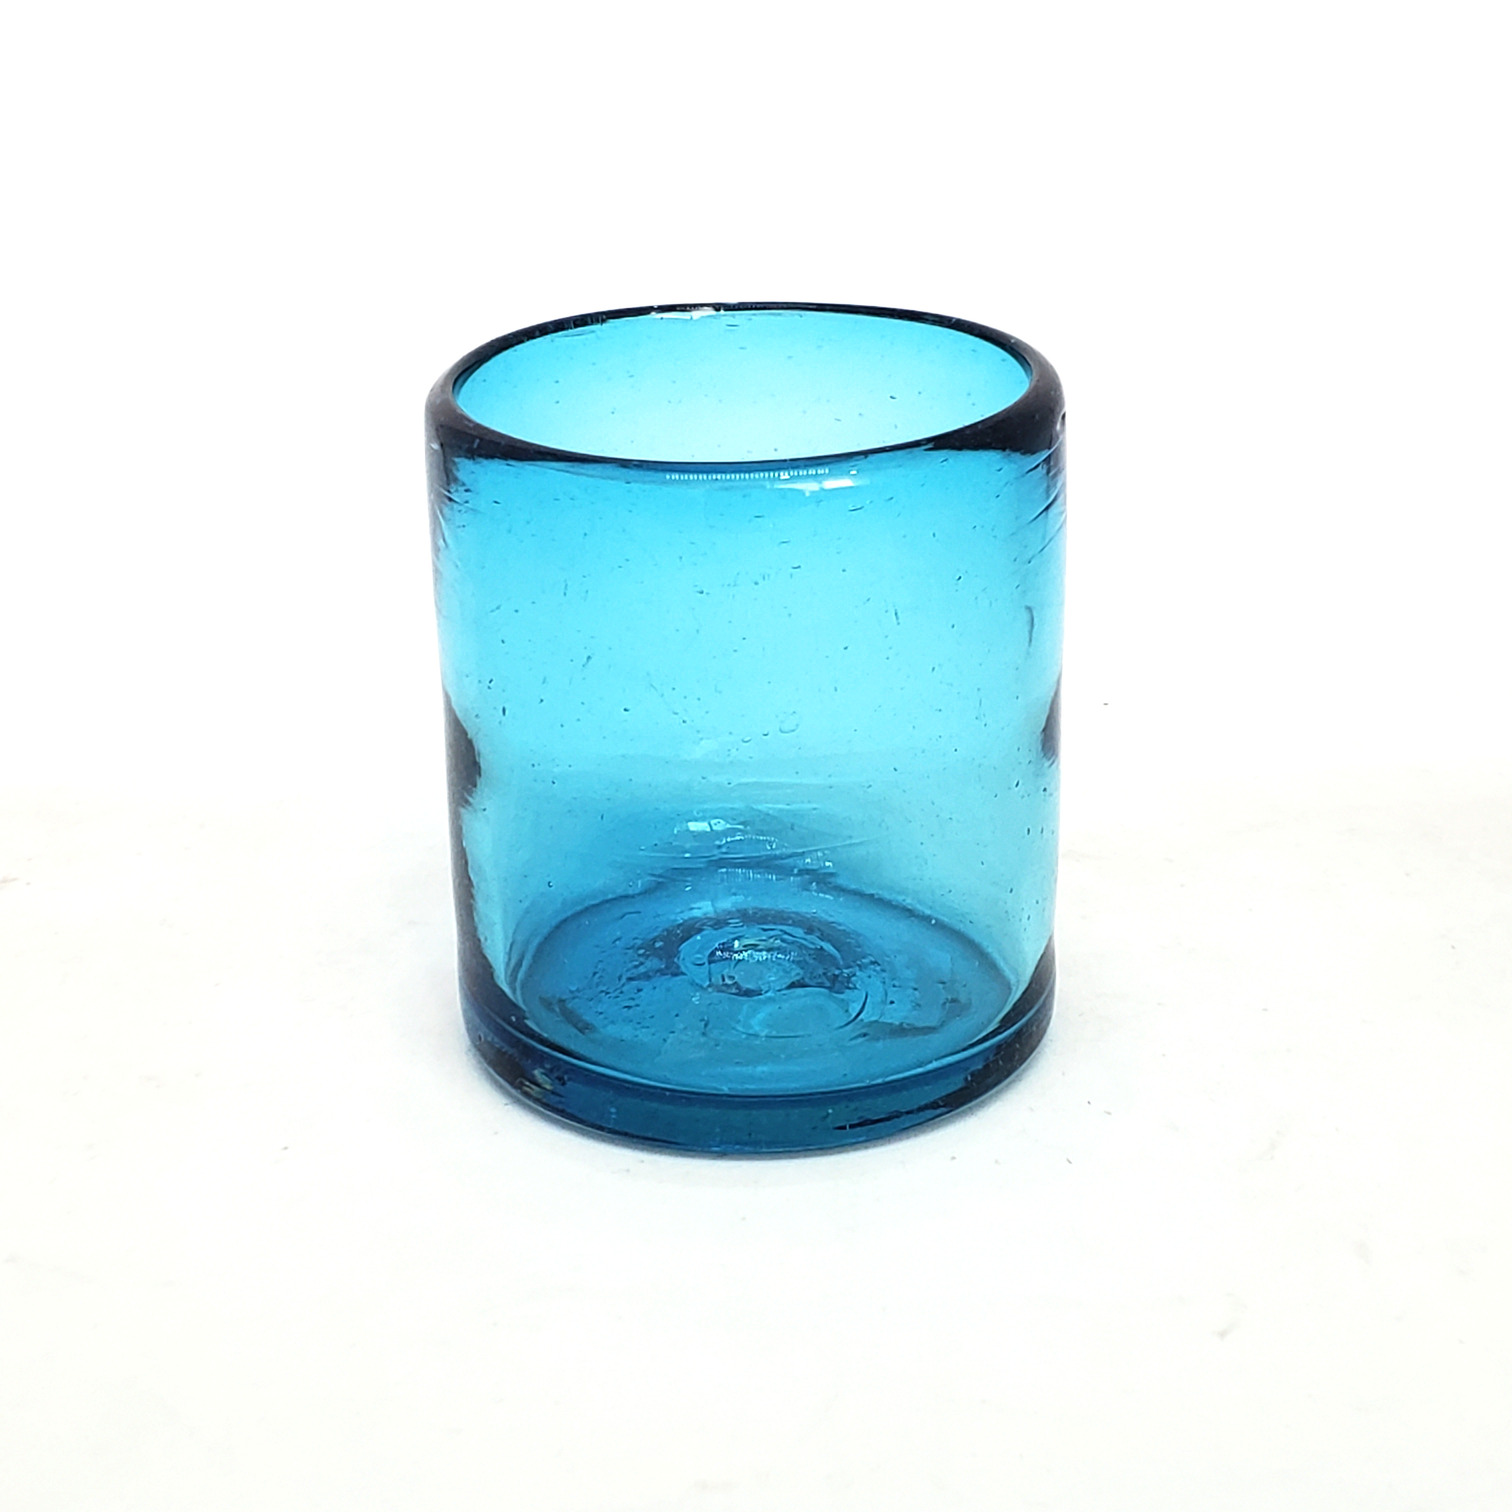 Wholesale Colored Glassware / Solid Aqua Blue 9 oz Short Tumblers  / Enhance your favorite drink with these colorful handcrafted glasses.